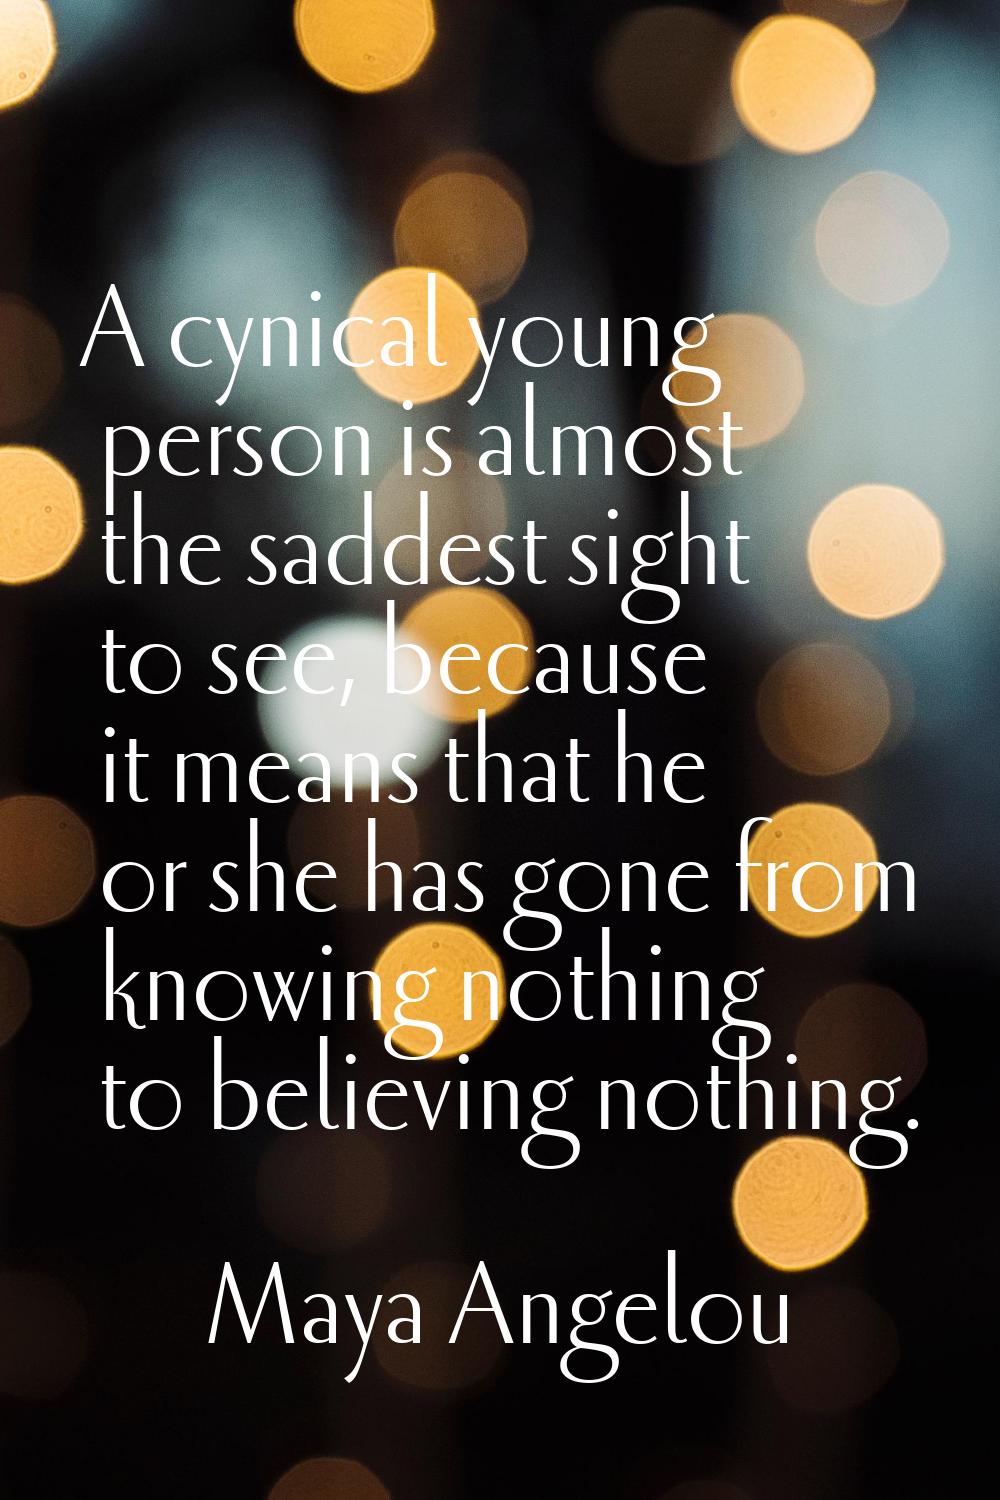 A cynical young person is almost the saddest sight to see, because it means that he or she has gone